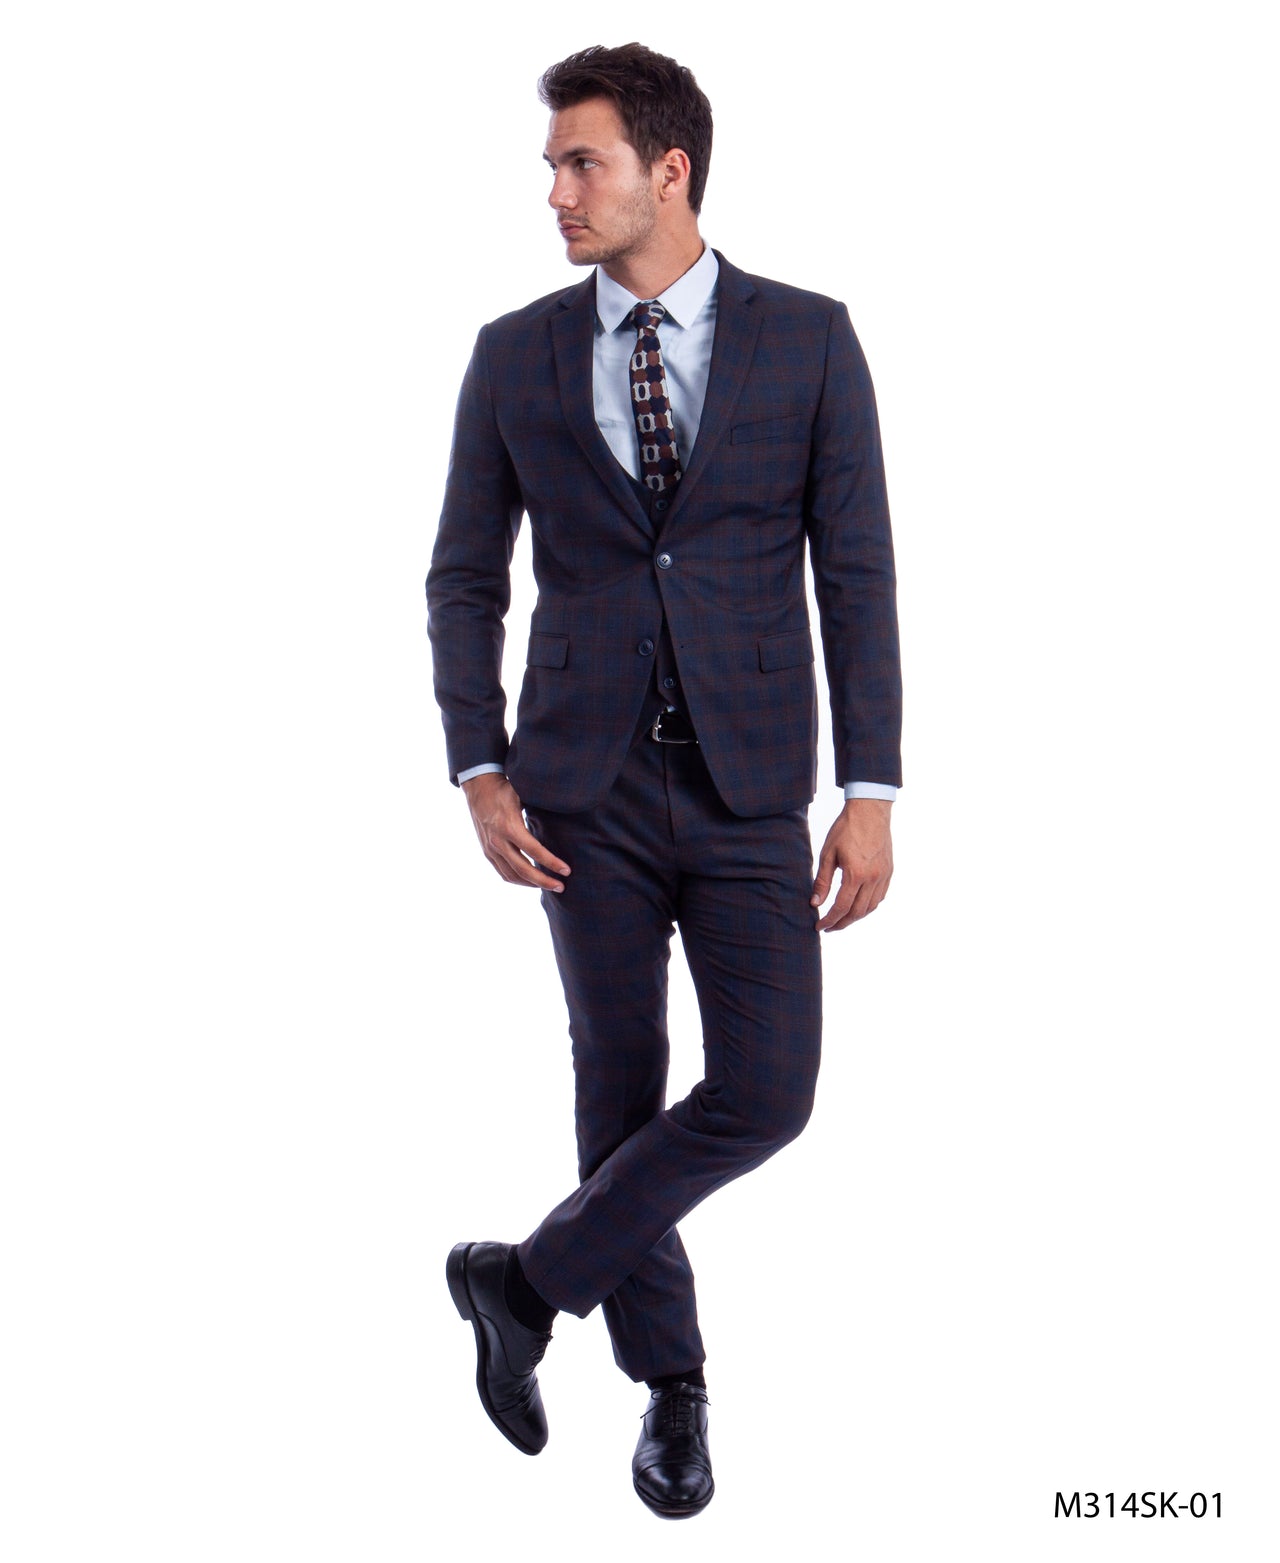 Blue/Brown Suit For Men Formal Suits For All Ocassions - Hattitude